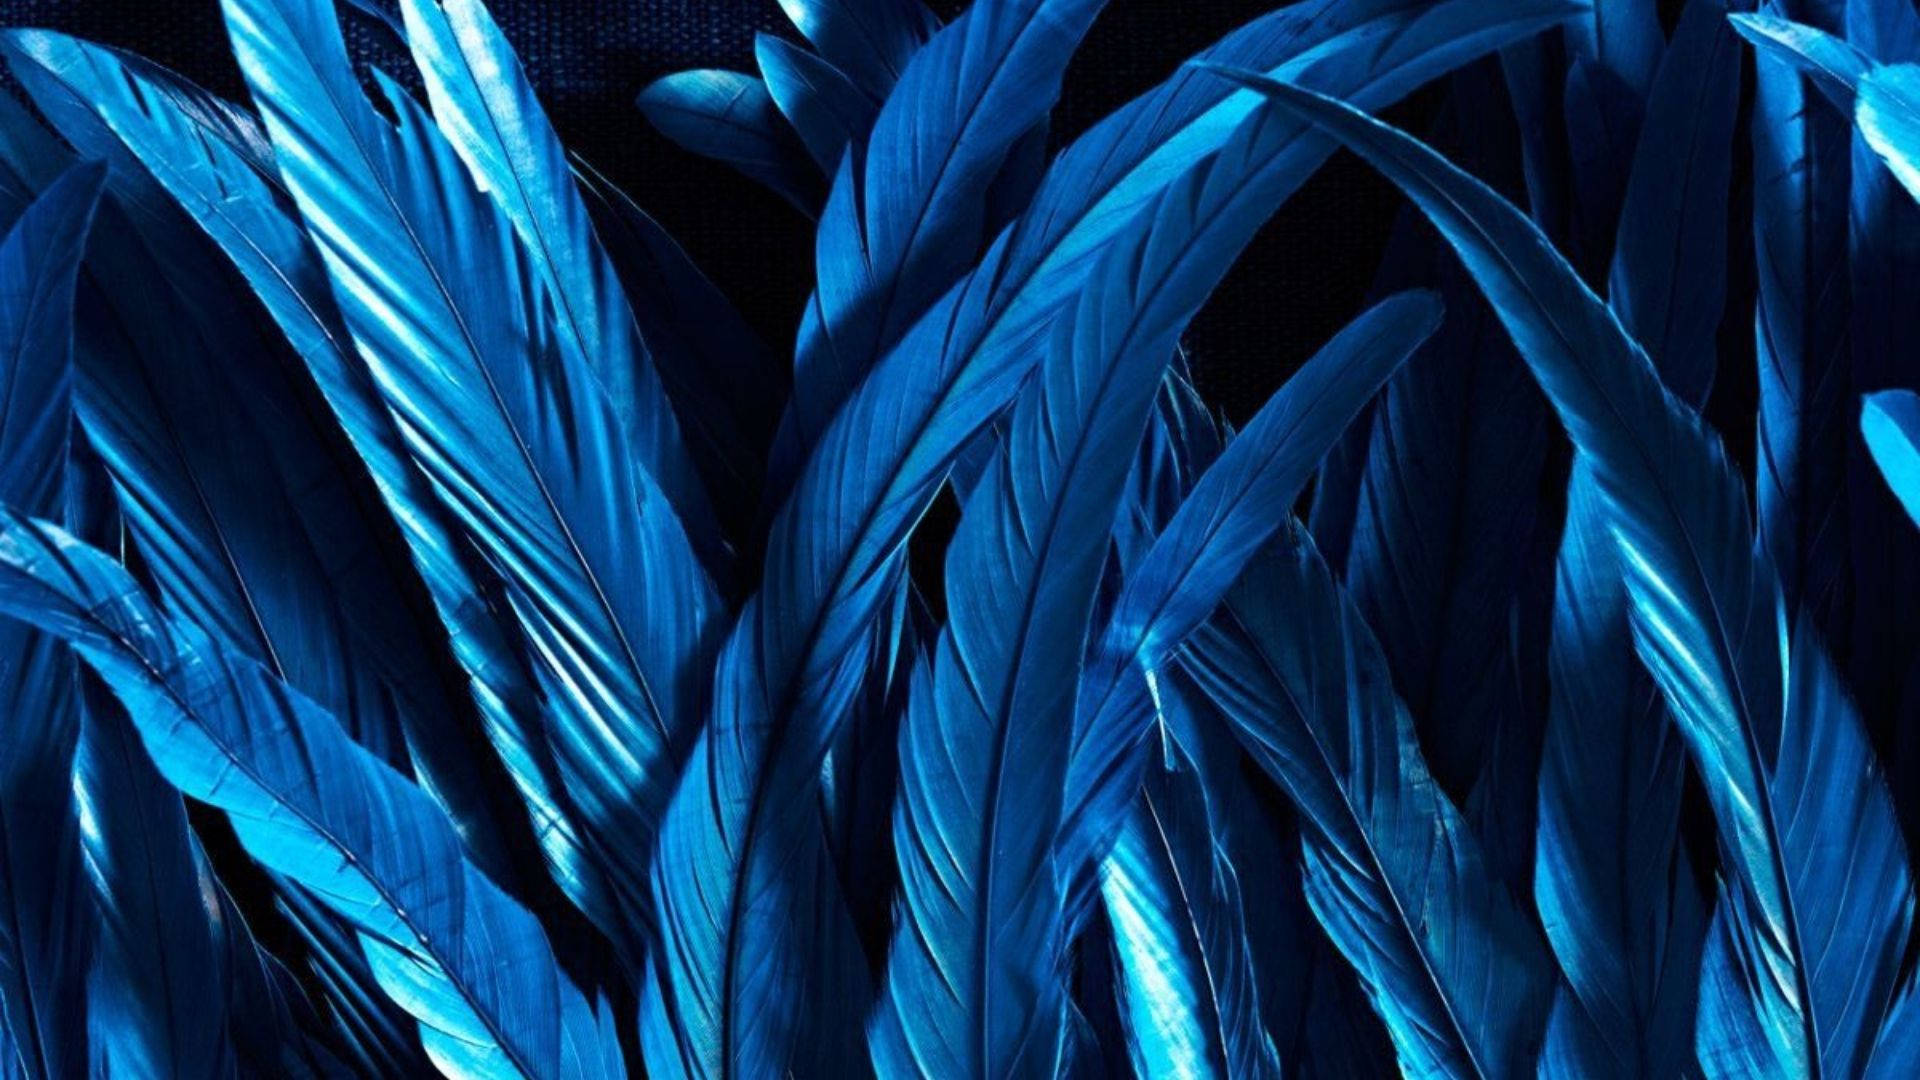 Download Neon Blue Feathers Wallpaper